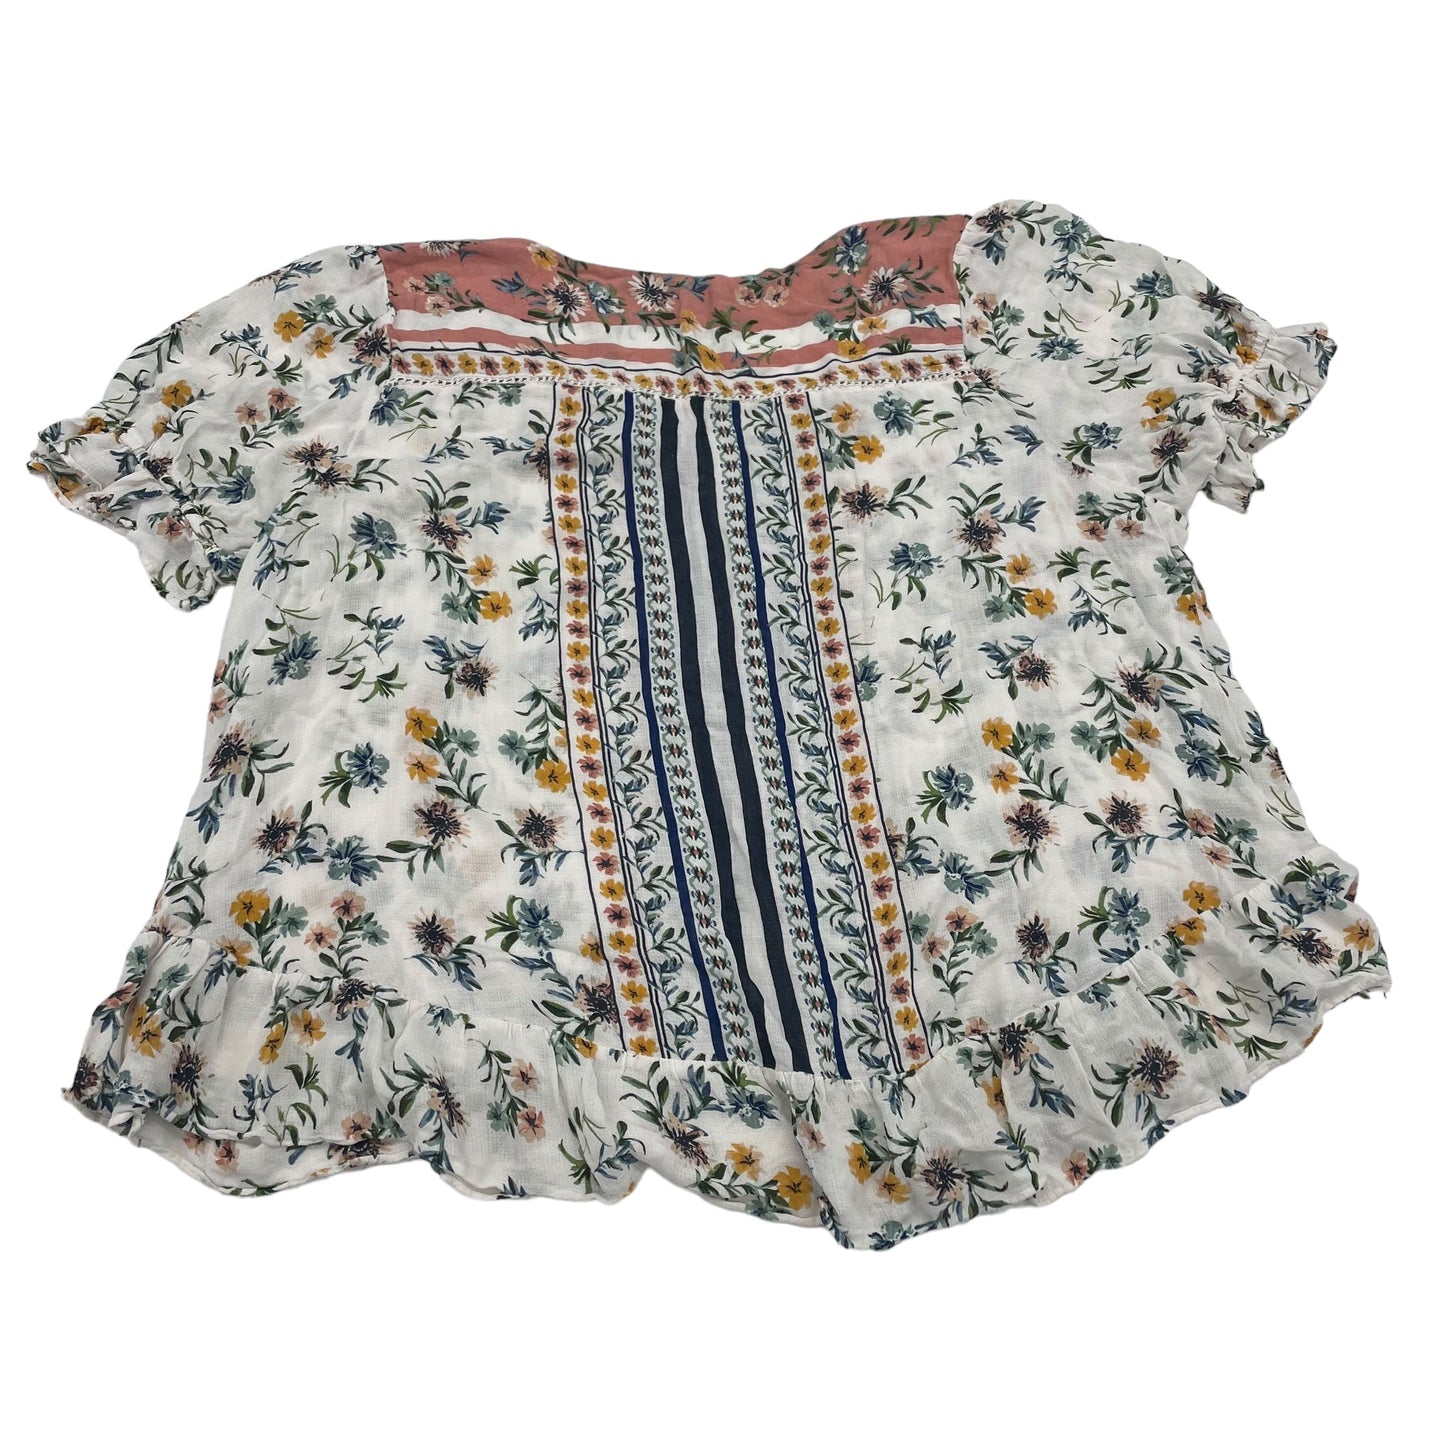 FLORAL PRINT TOP SS by LUCKY BRAND Size:3X